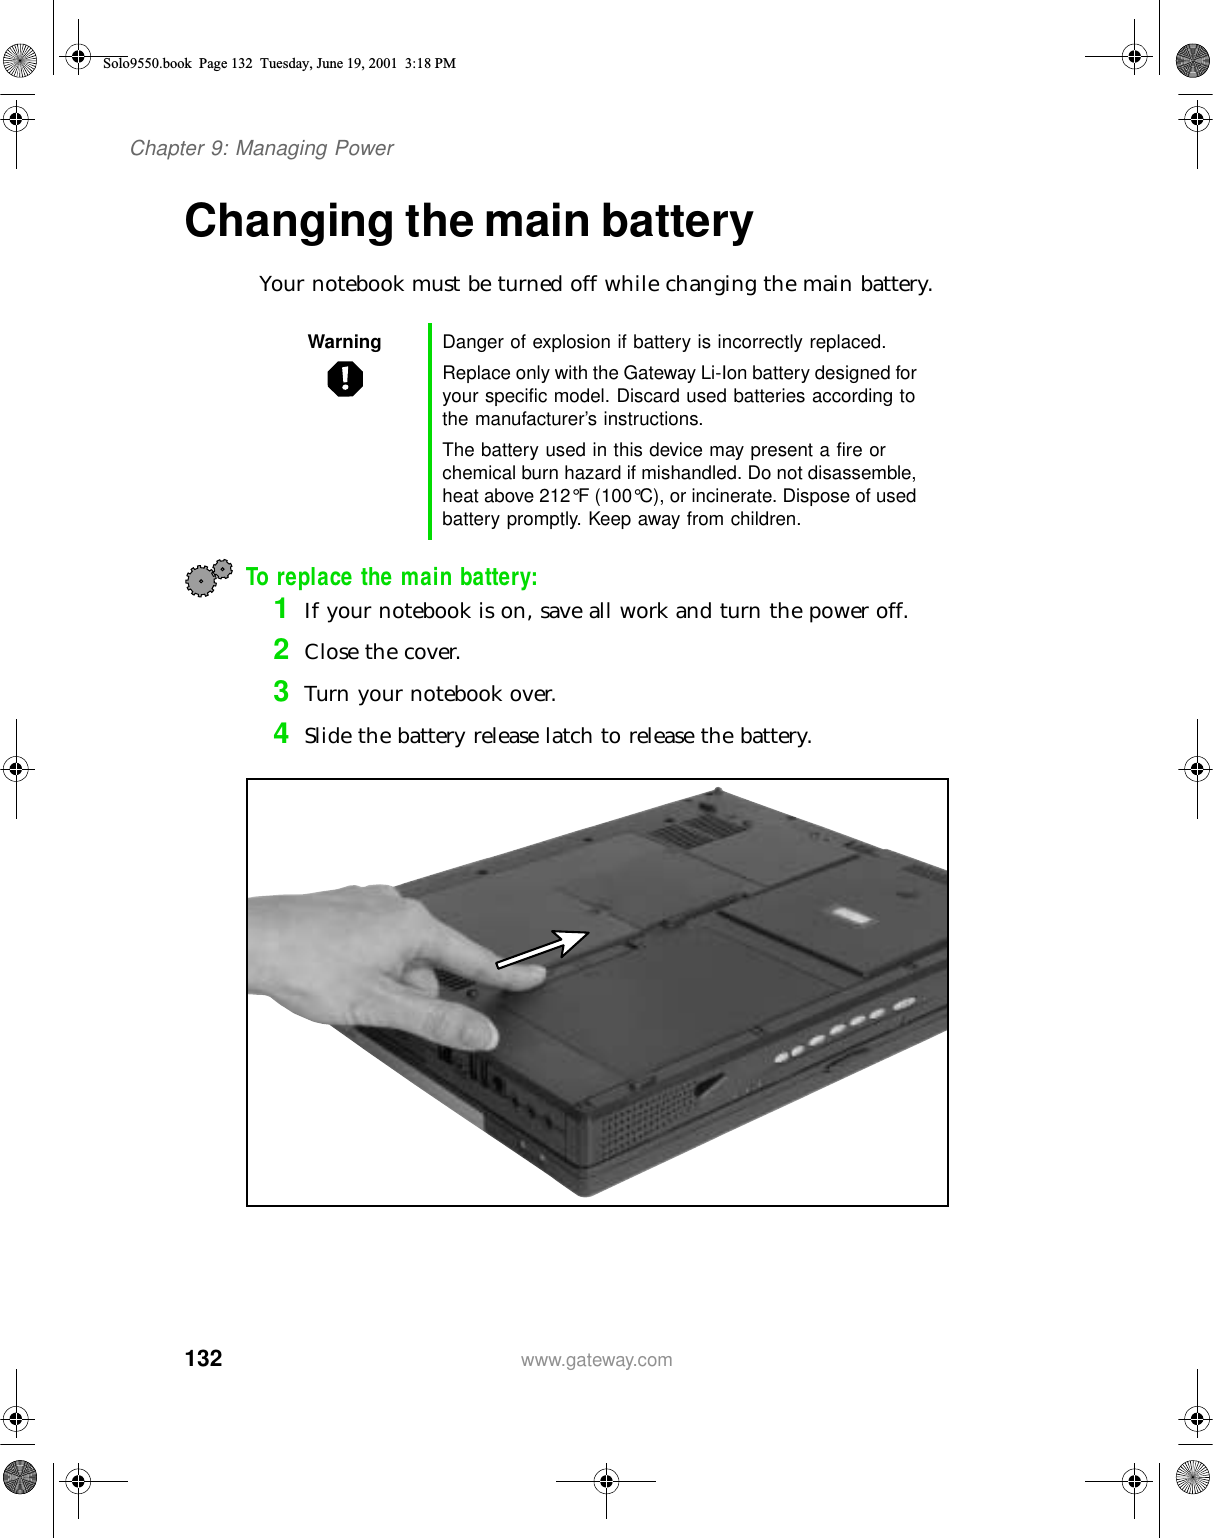 132Chapter 9: Managing Powerwww.gateway.comChanging the main batteryYour notebook must be turned off while changing the main battery.To replace the main battery:1If your notebook is on, save all work and turn the power off.2Close the cover.3Turn your notebook over.4Slide the battery release latch to release the battery.Warning Danger of explosion if battery is incorrectly replaced.Replace only with the Gateway Li-Ion battery designed for your specific model. Discard used batteries according to the manufacturer’s instructions.The battery used in this device may present a fire or chemical burn hazard if mishandled. Do not disassemble, heat above 212°F (100°C), or incinerate. Dispose of used battery promptly. Keep away from children.Solo9550.book Page 132 Tuesday, June 19, 2001 3:18 PM